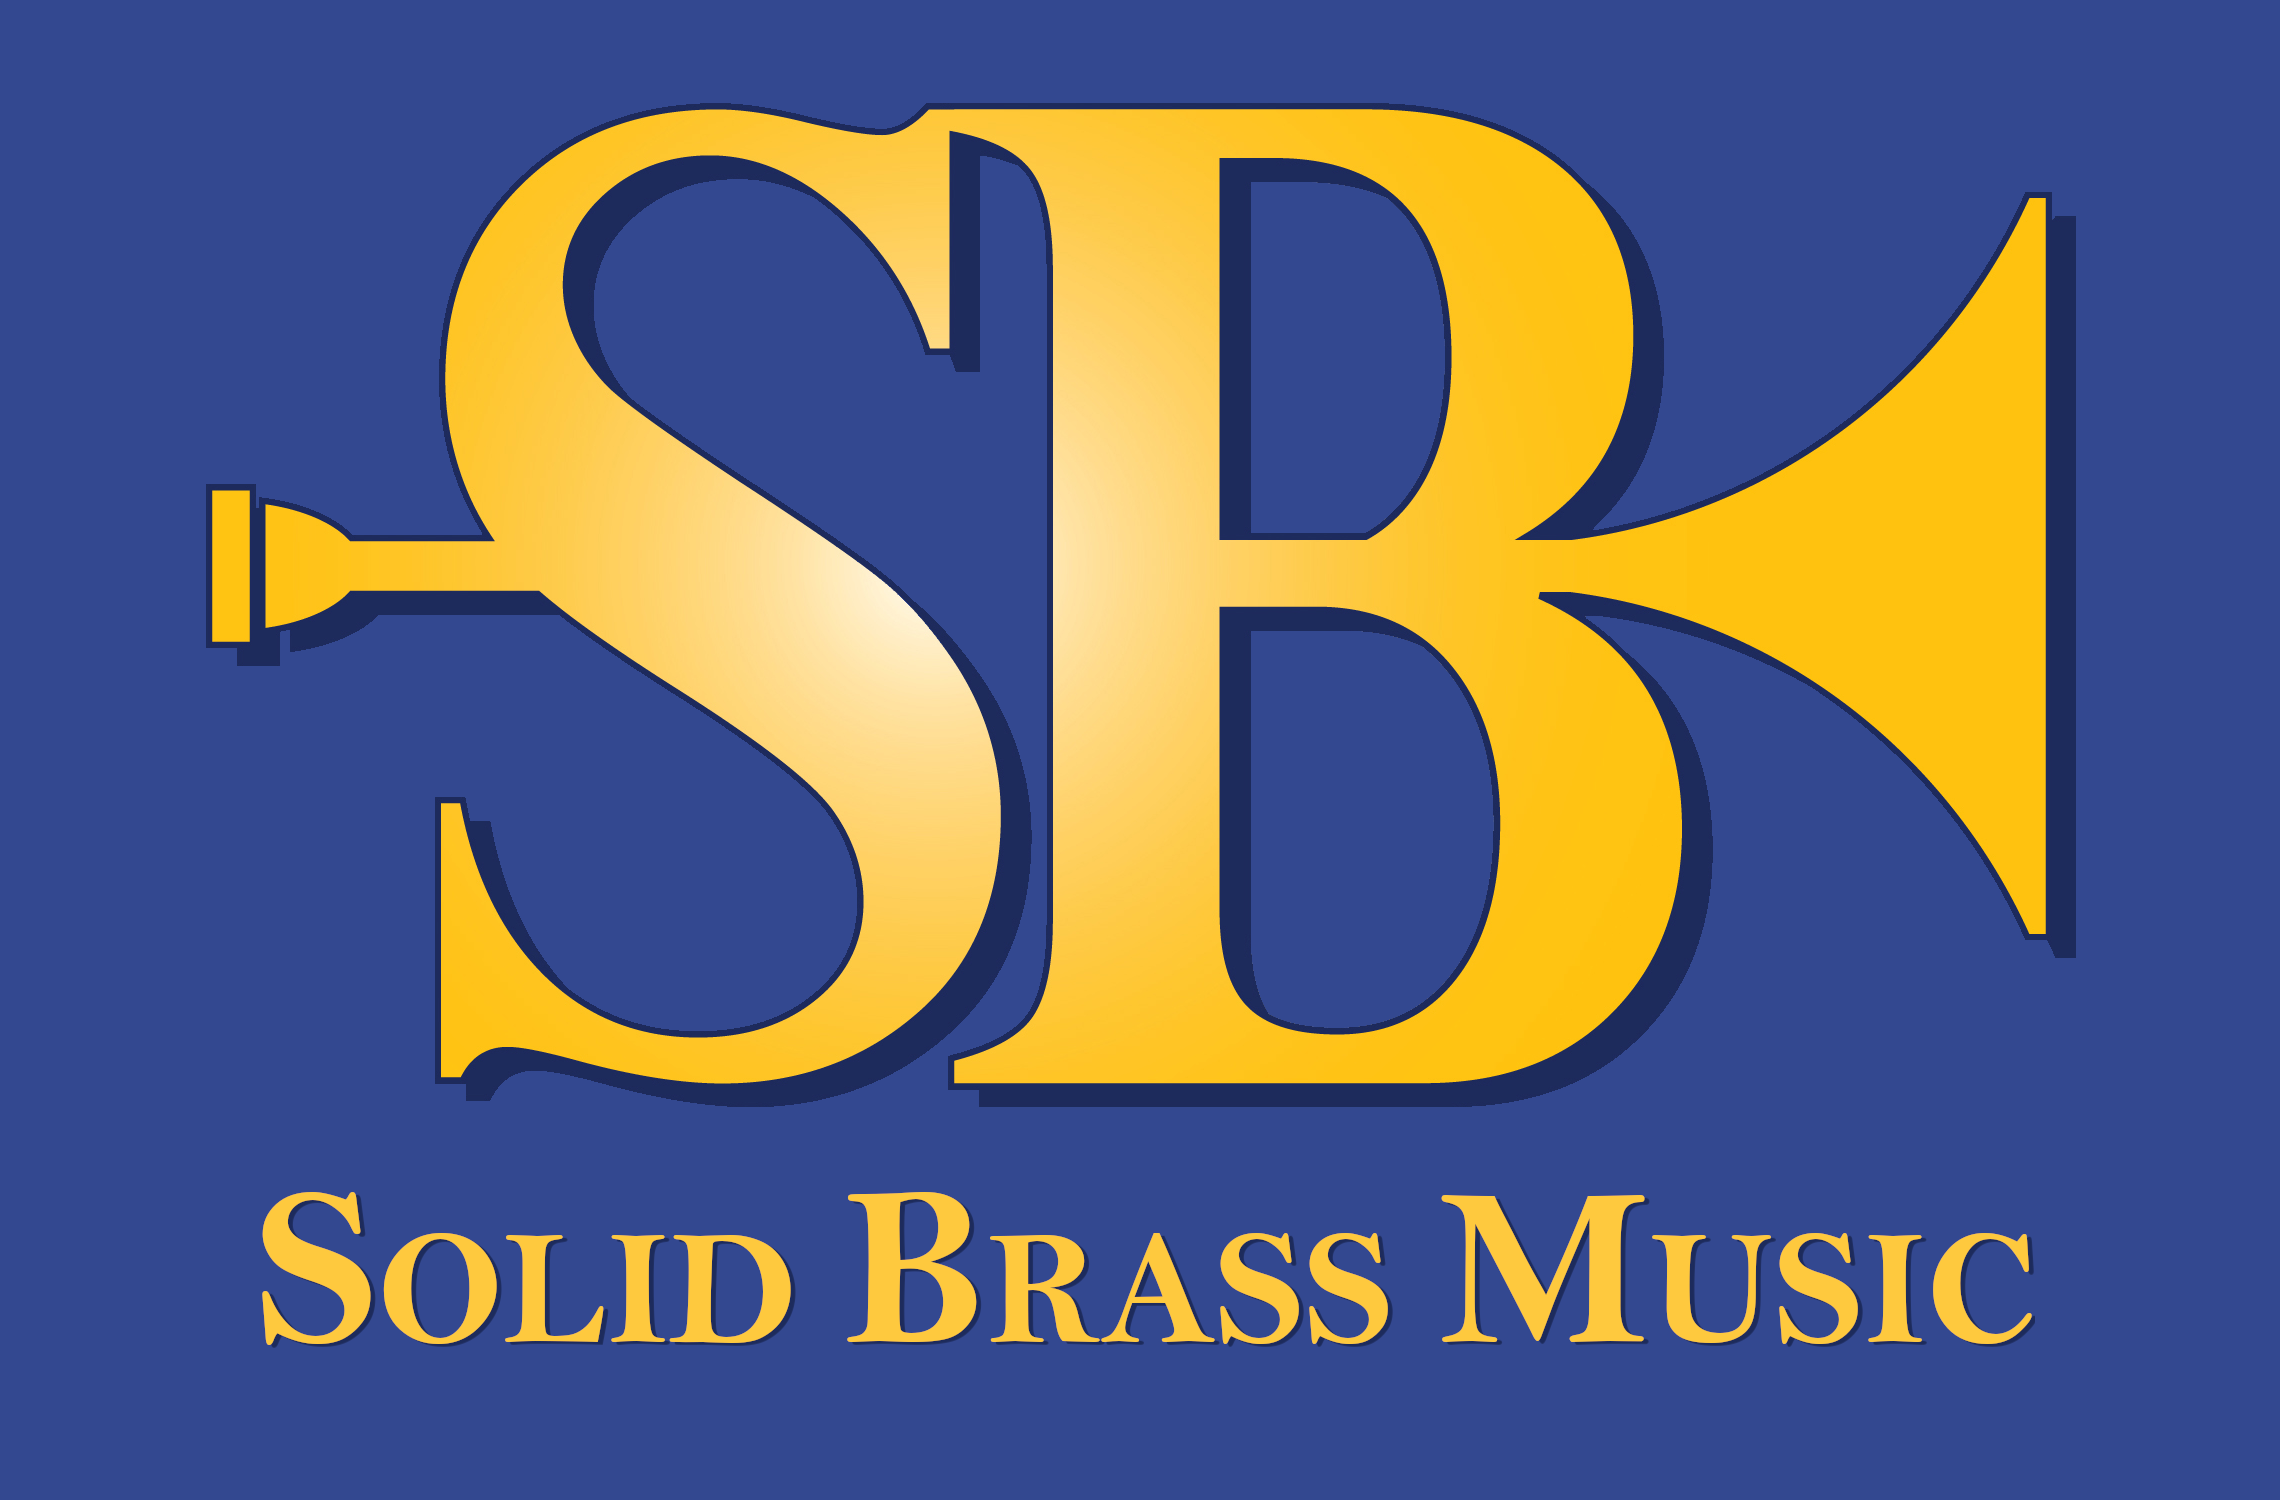 Category: Brass Band - Solid Brass Music